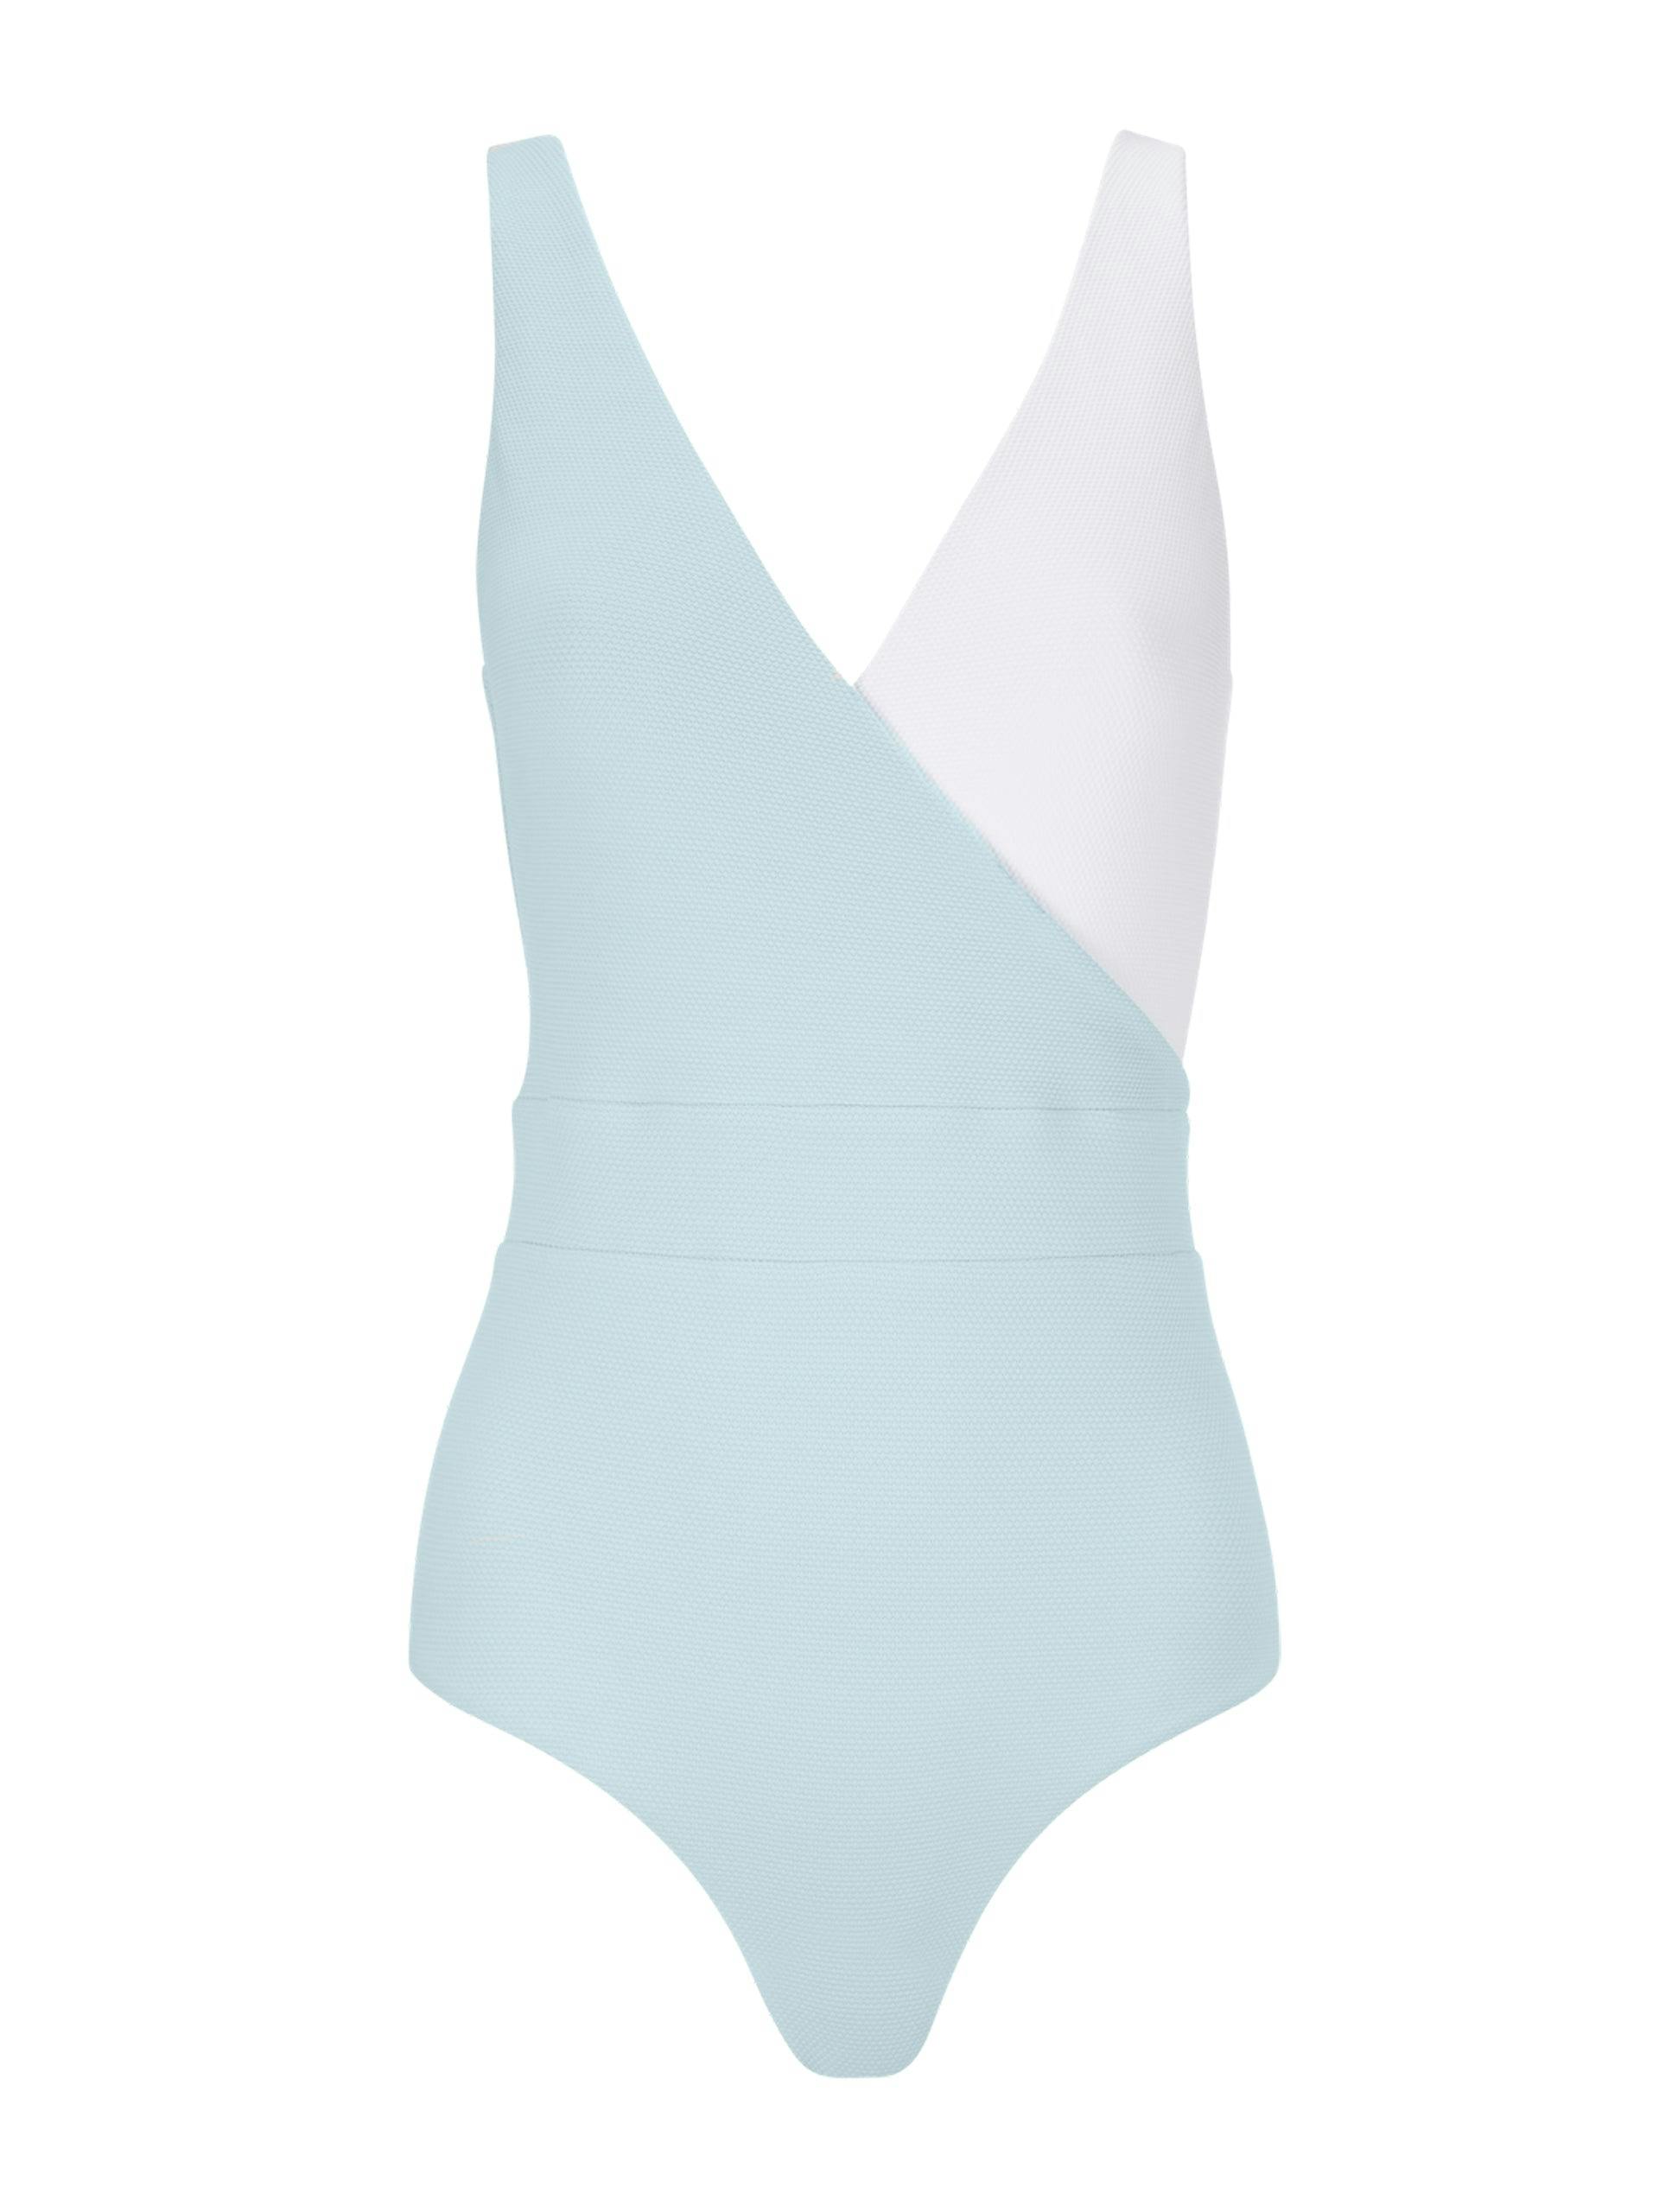 Asymmetric sky blue and white Ashley wrap-over swimsuit